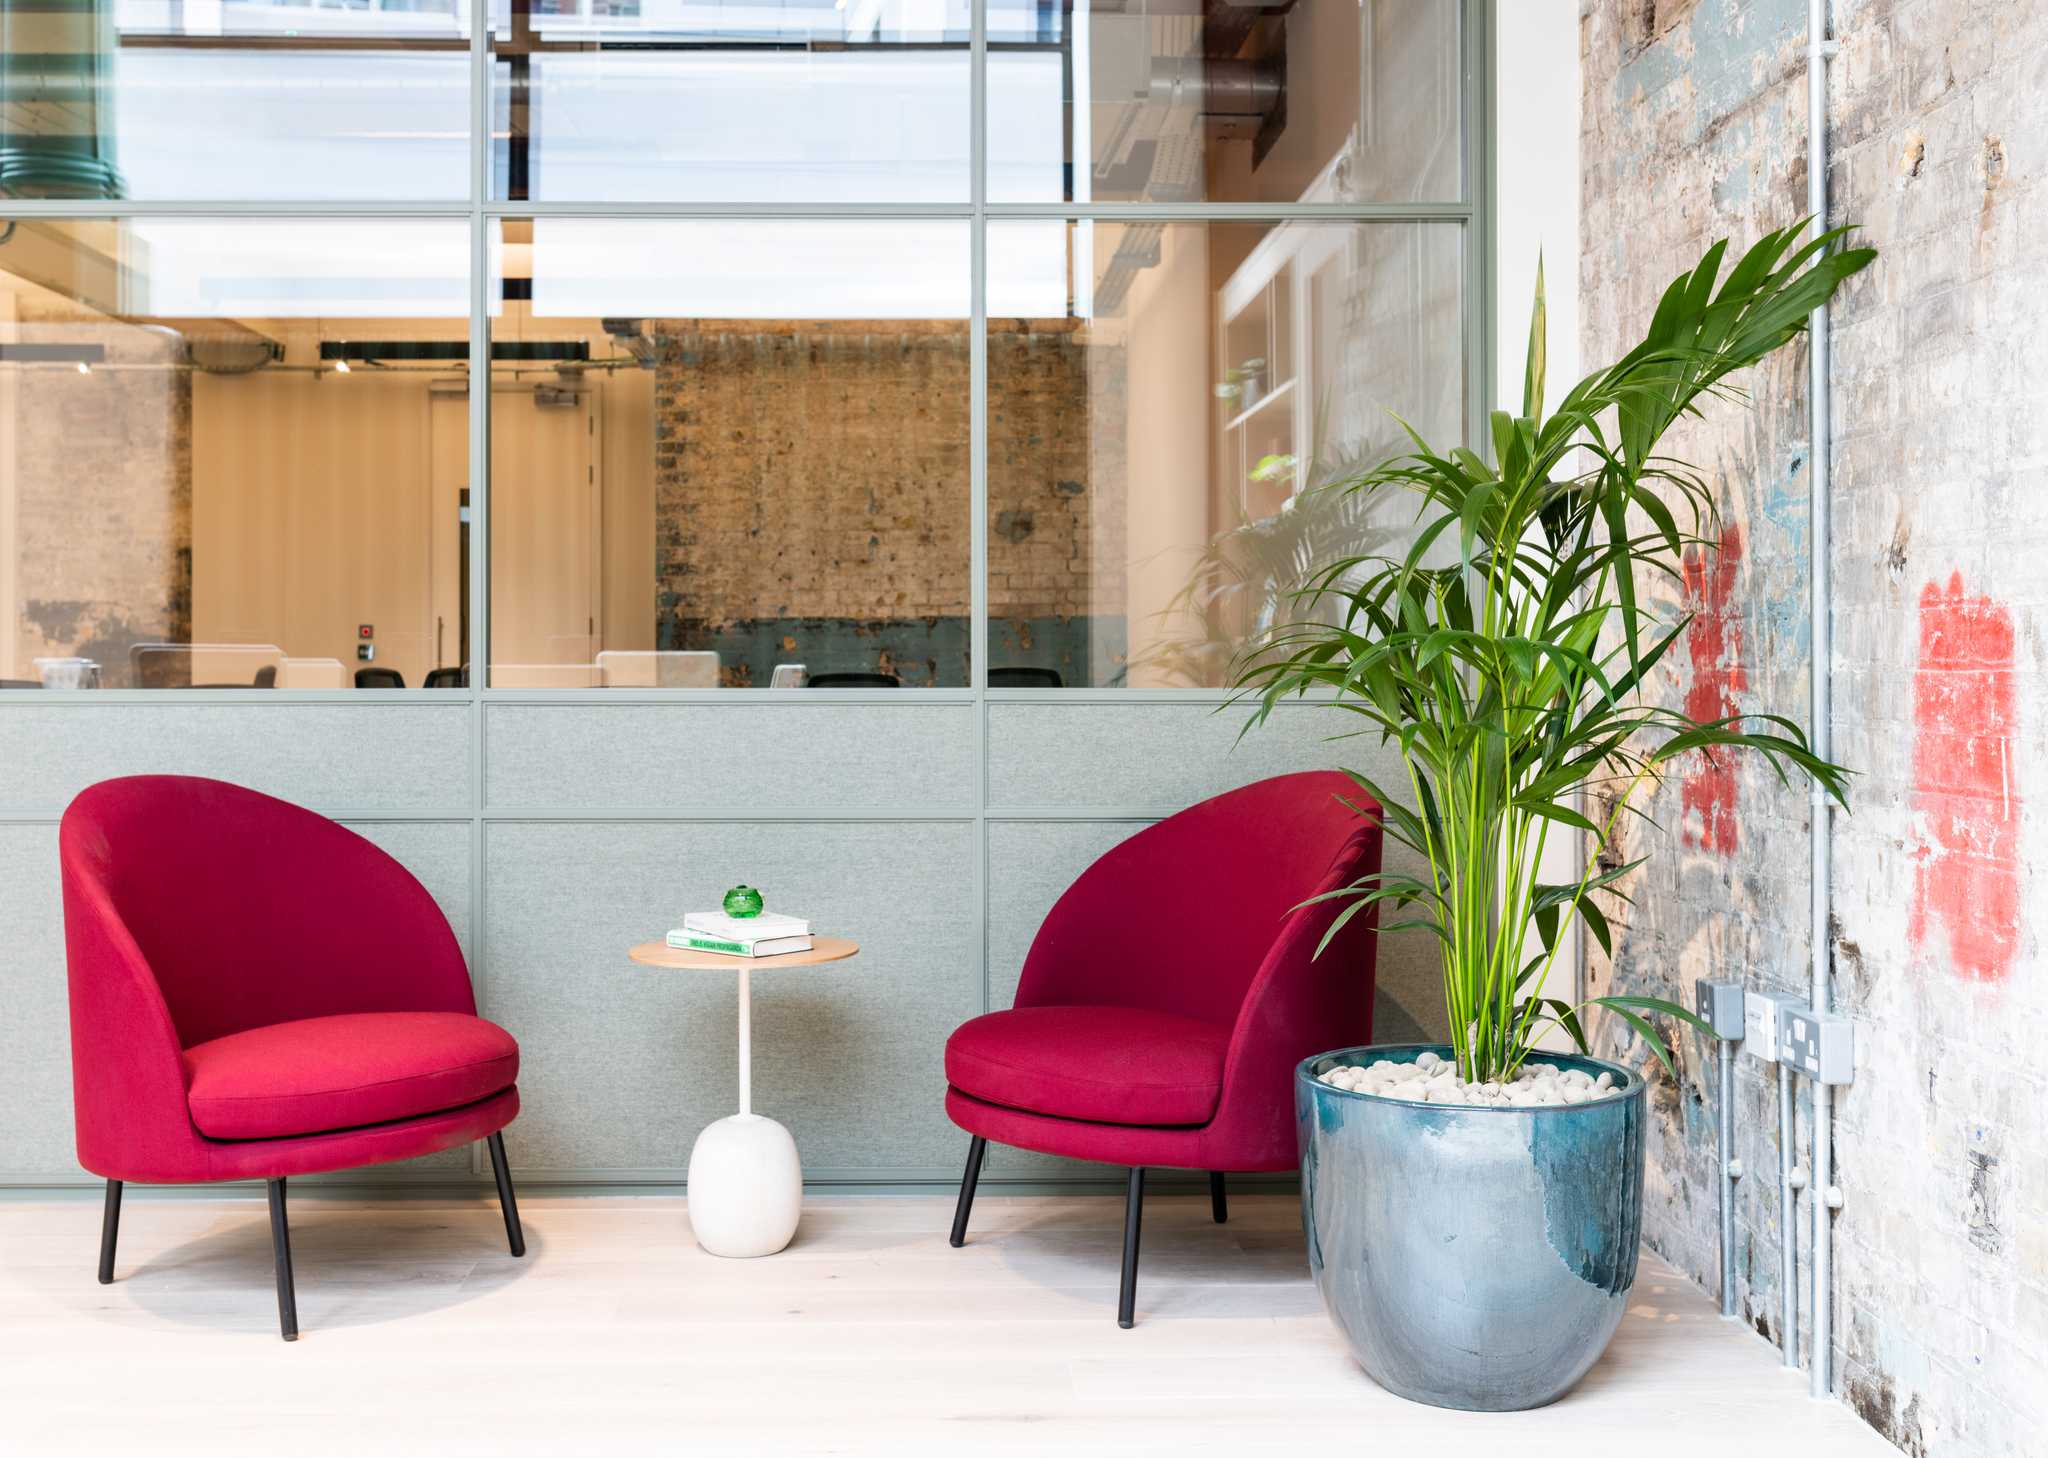 A bright, open plan Fora workspace in London.